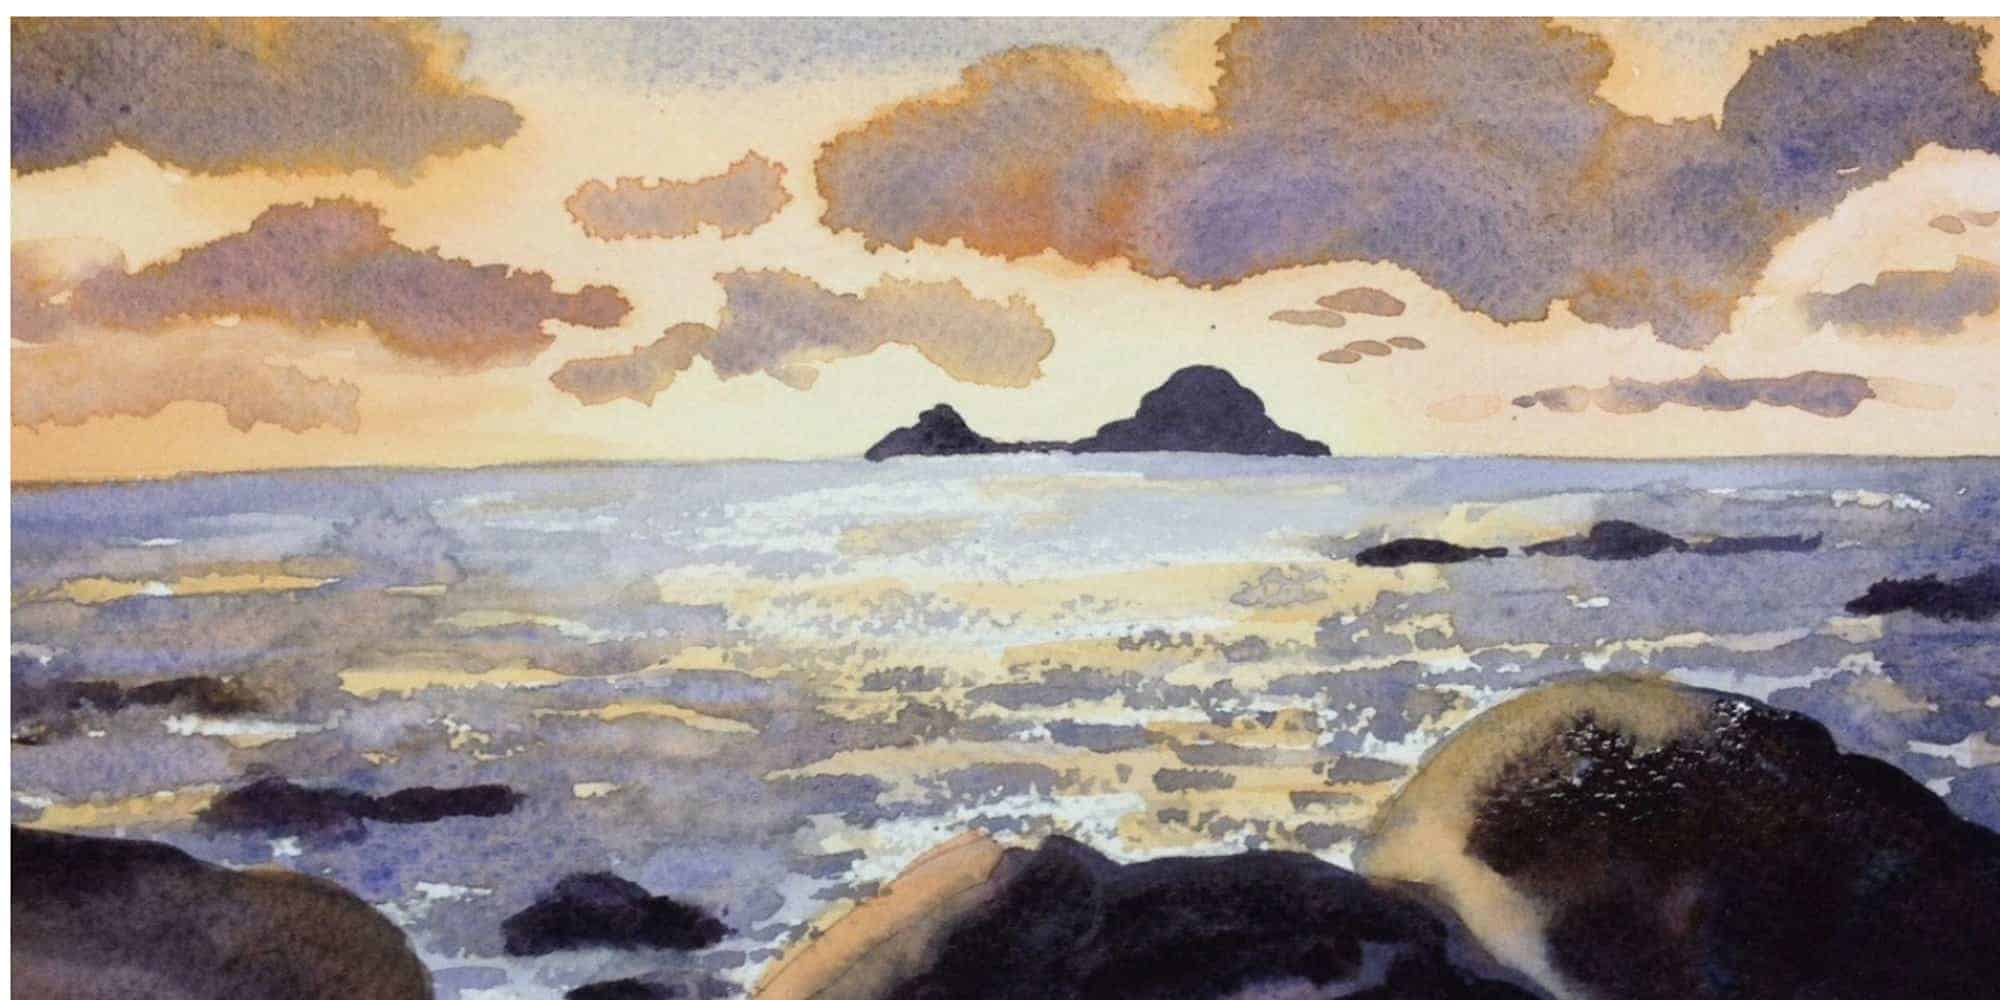 Watercolour painting of the sea